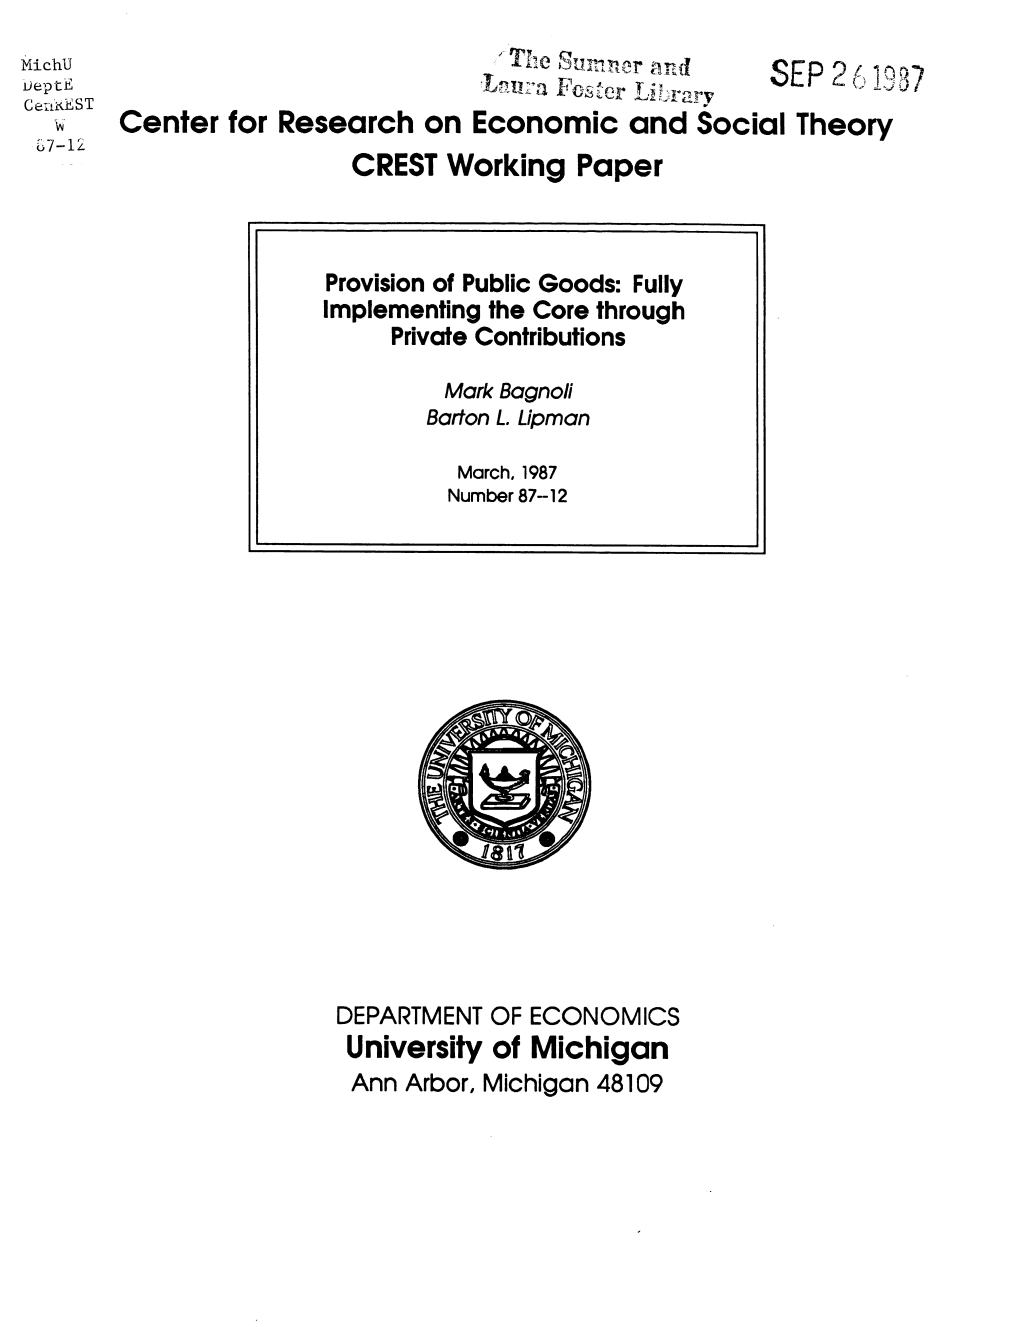 Center for Research on Economic and Social Theory CREST Working Paper University of Michigan